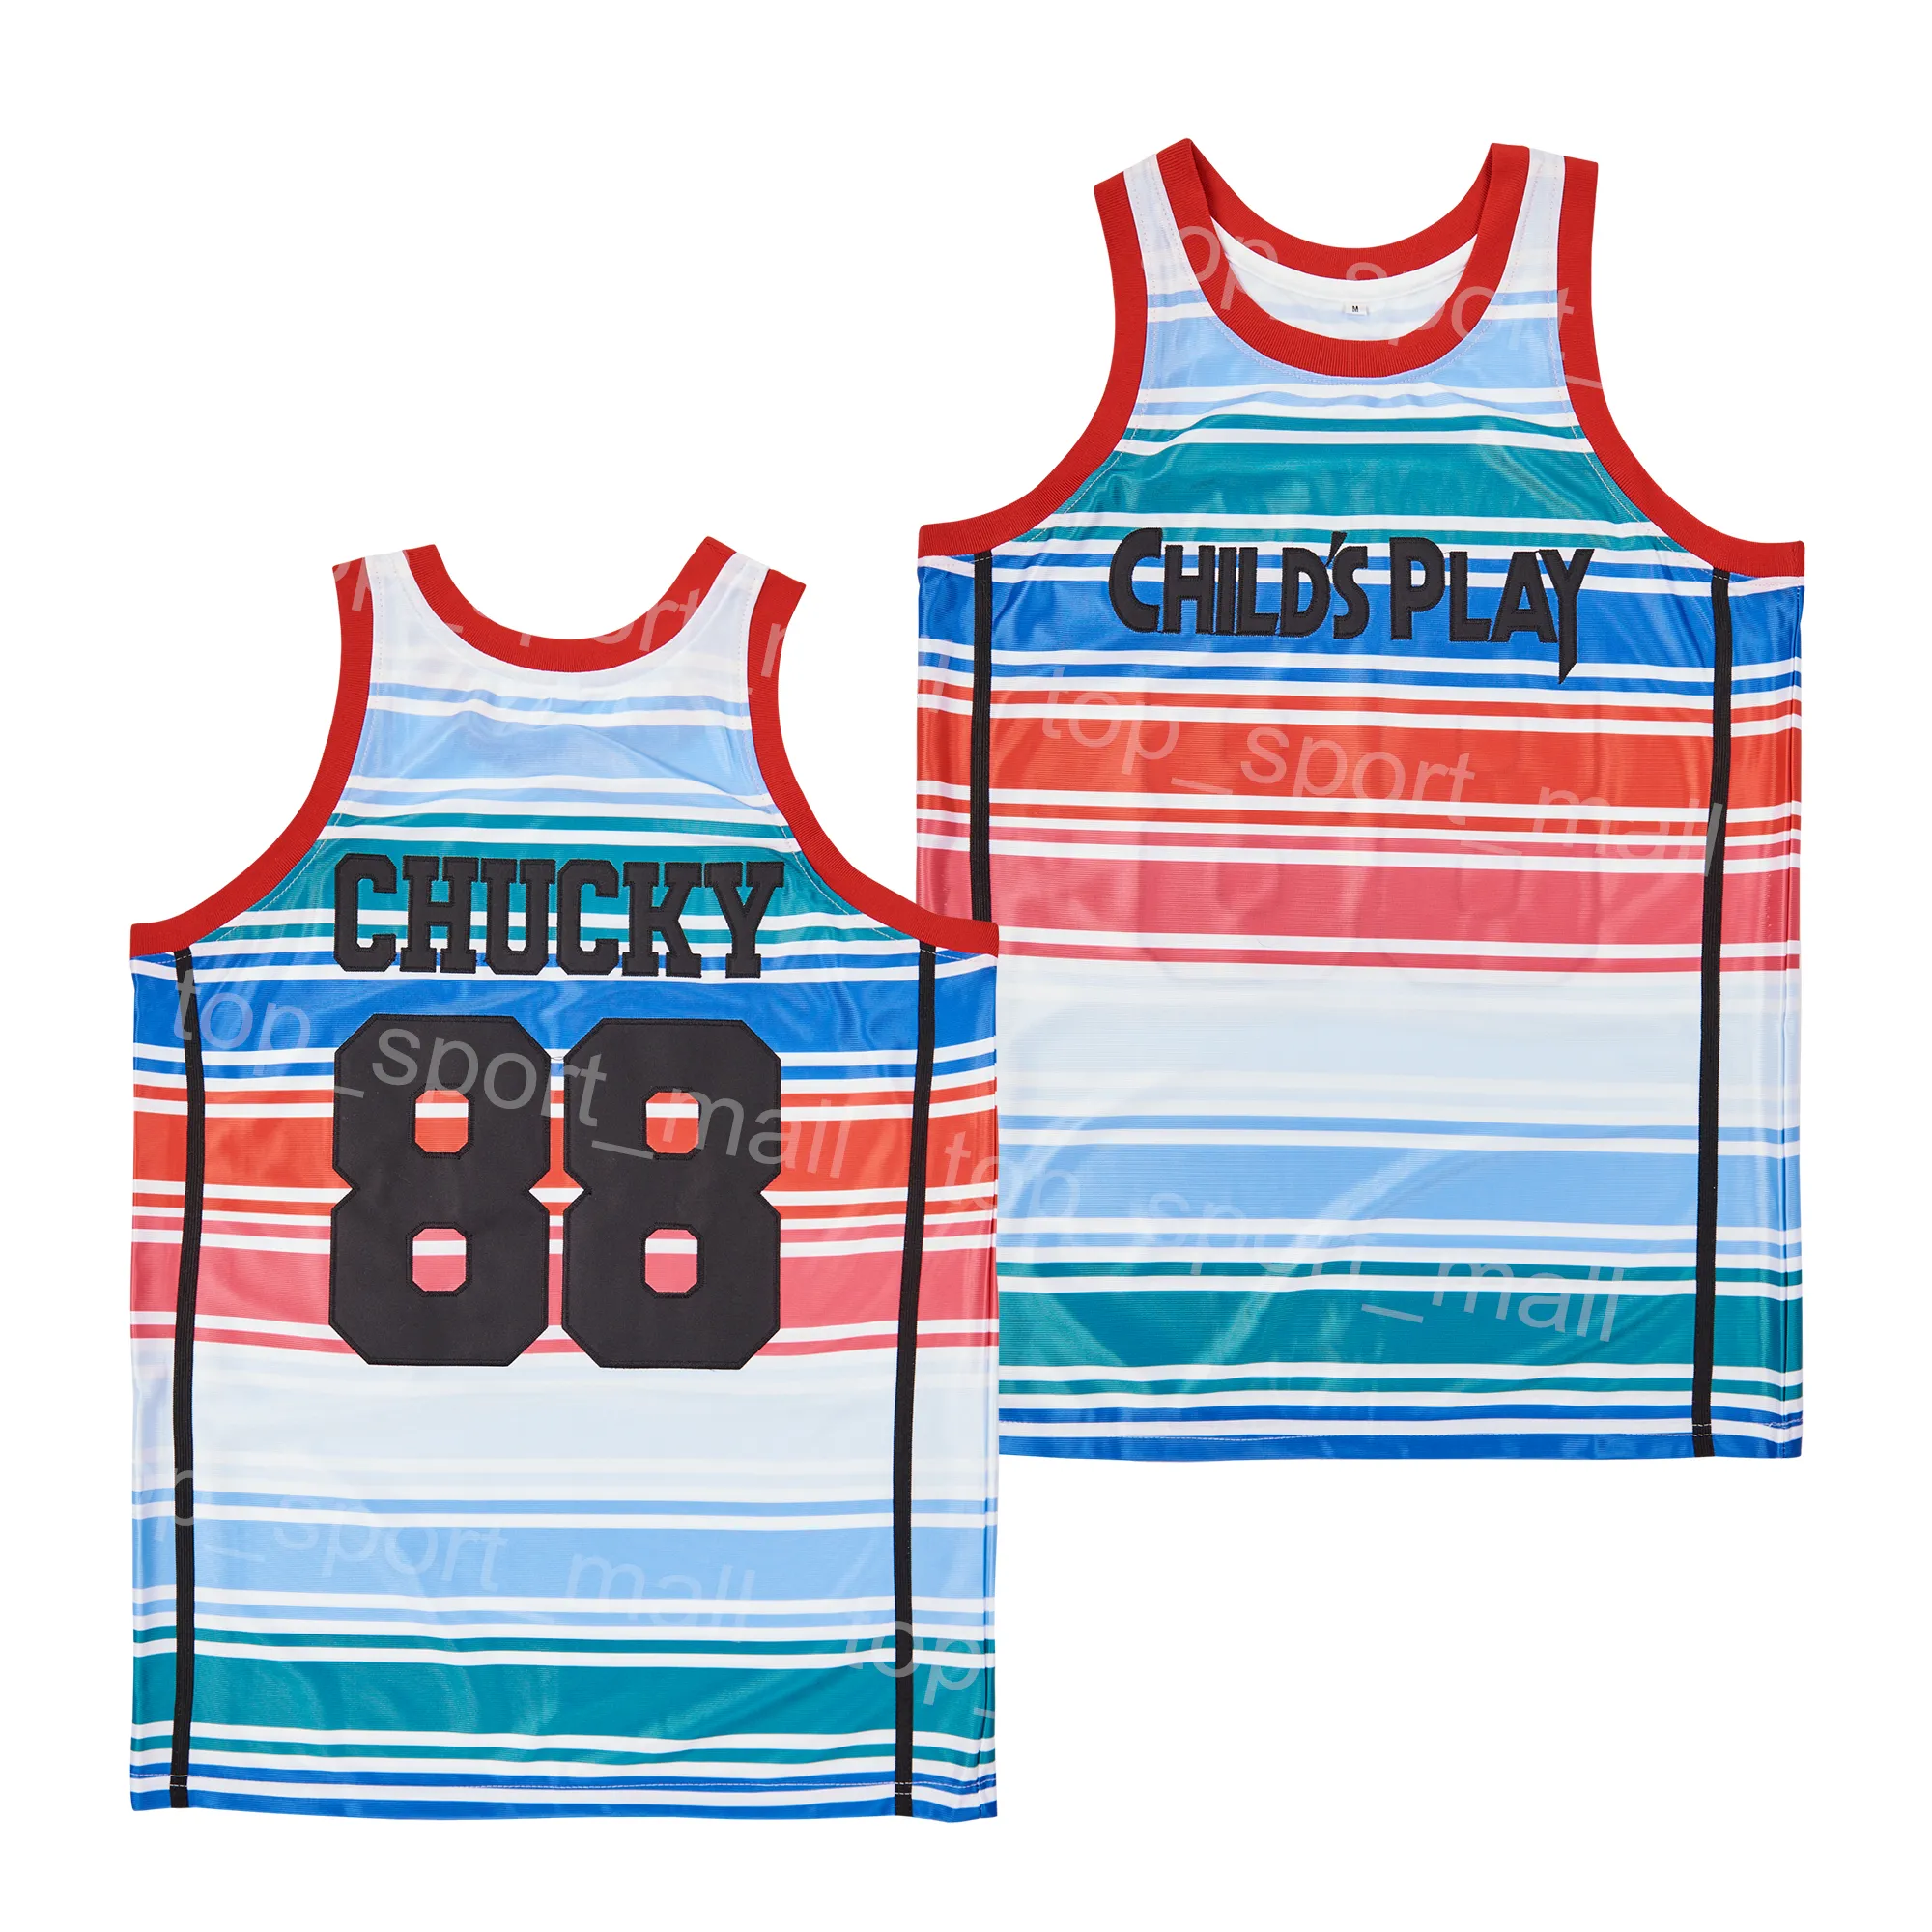 Movie Basketball Film 1988 Chucky 88 Child's Play Jersey High School Summer Breattable Retro Hiphop for Sport Fans Pure Cotton College Shirt Hiphop Team White